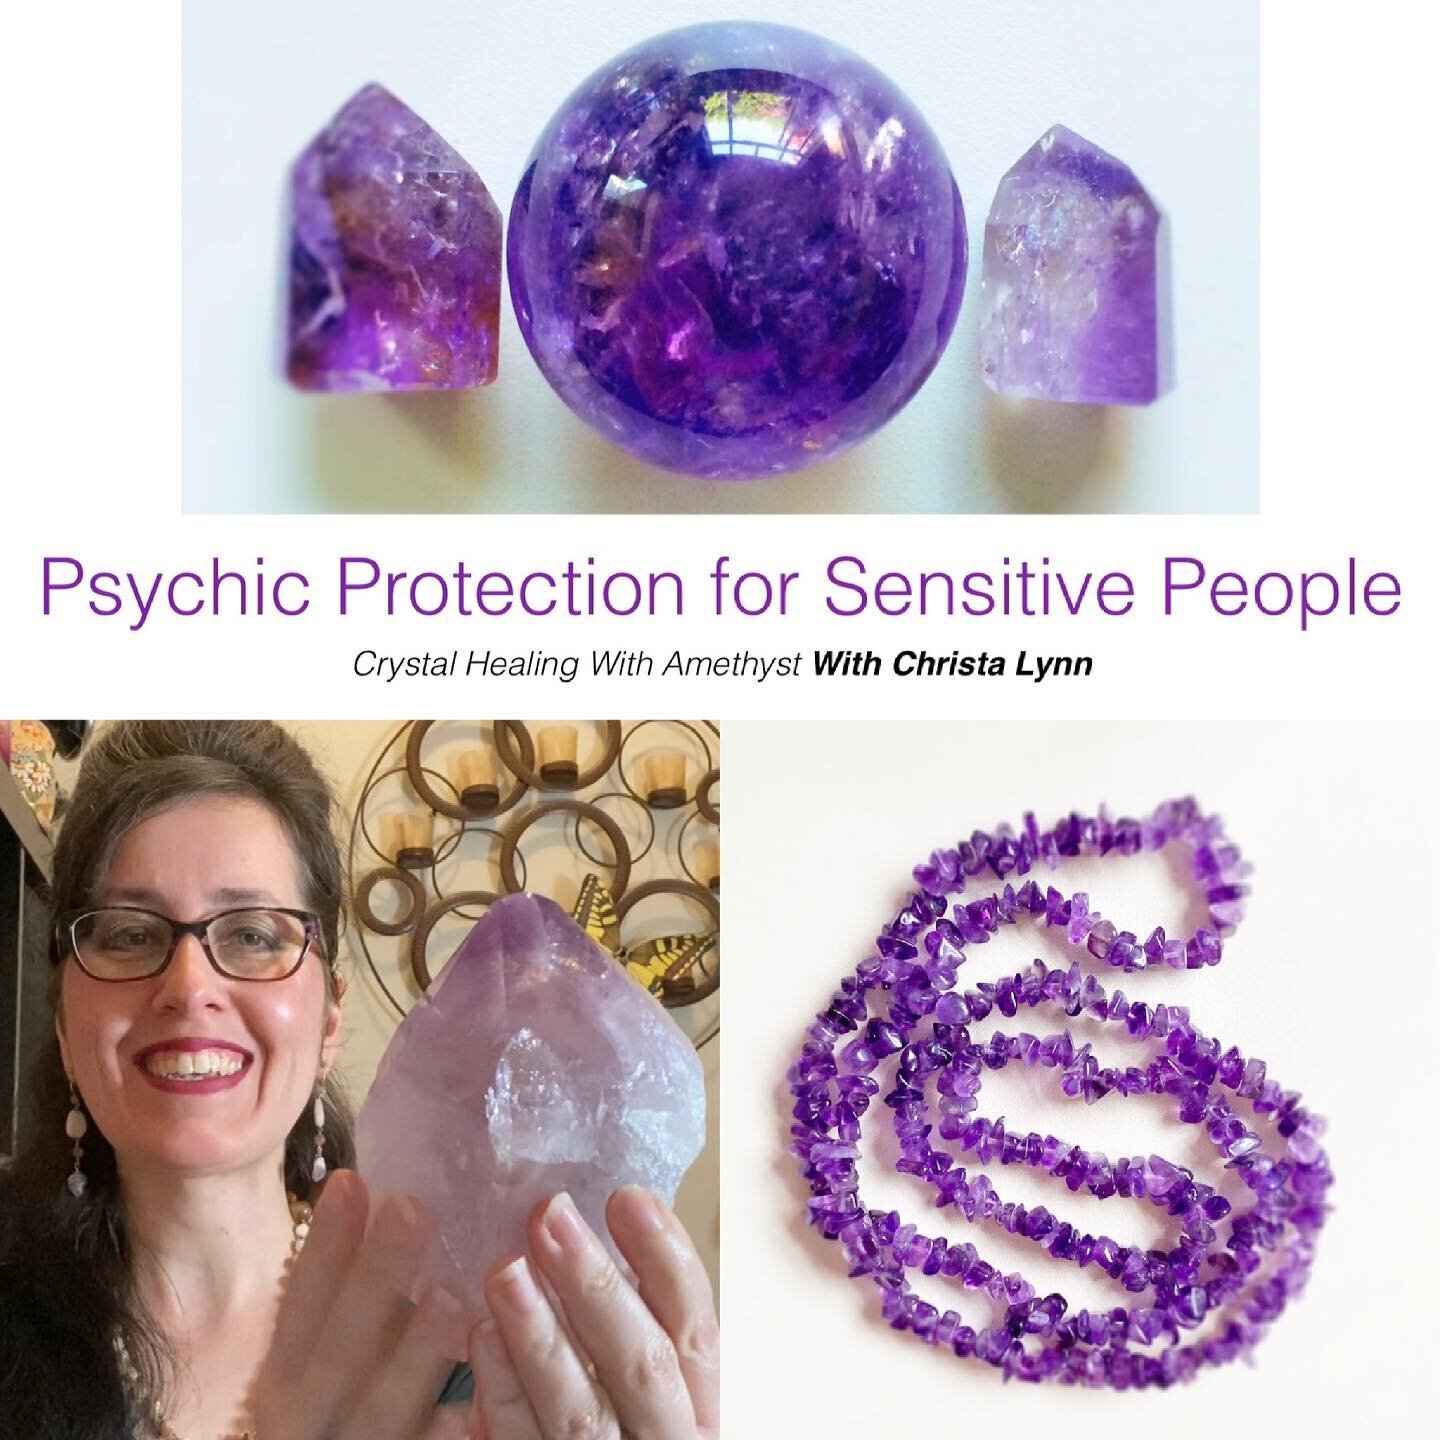 I will be teaching the live &amp; interactive online amethyst class tomorrow! I&rsquo;m starting to prepare and gathering my amethyst crystals. Can&rsquo;t wait! 💜🌟💜 #crystals #gemstones #gemstonejewellery #crystaljewelrysale #crystalclass #chakra